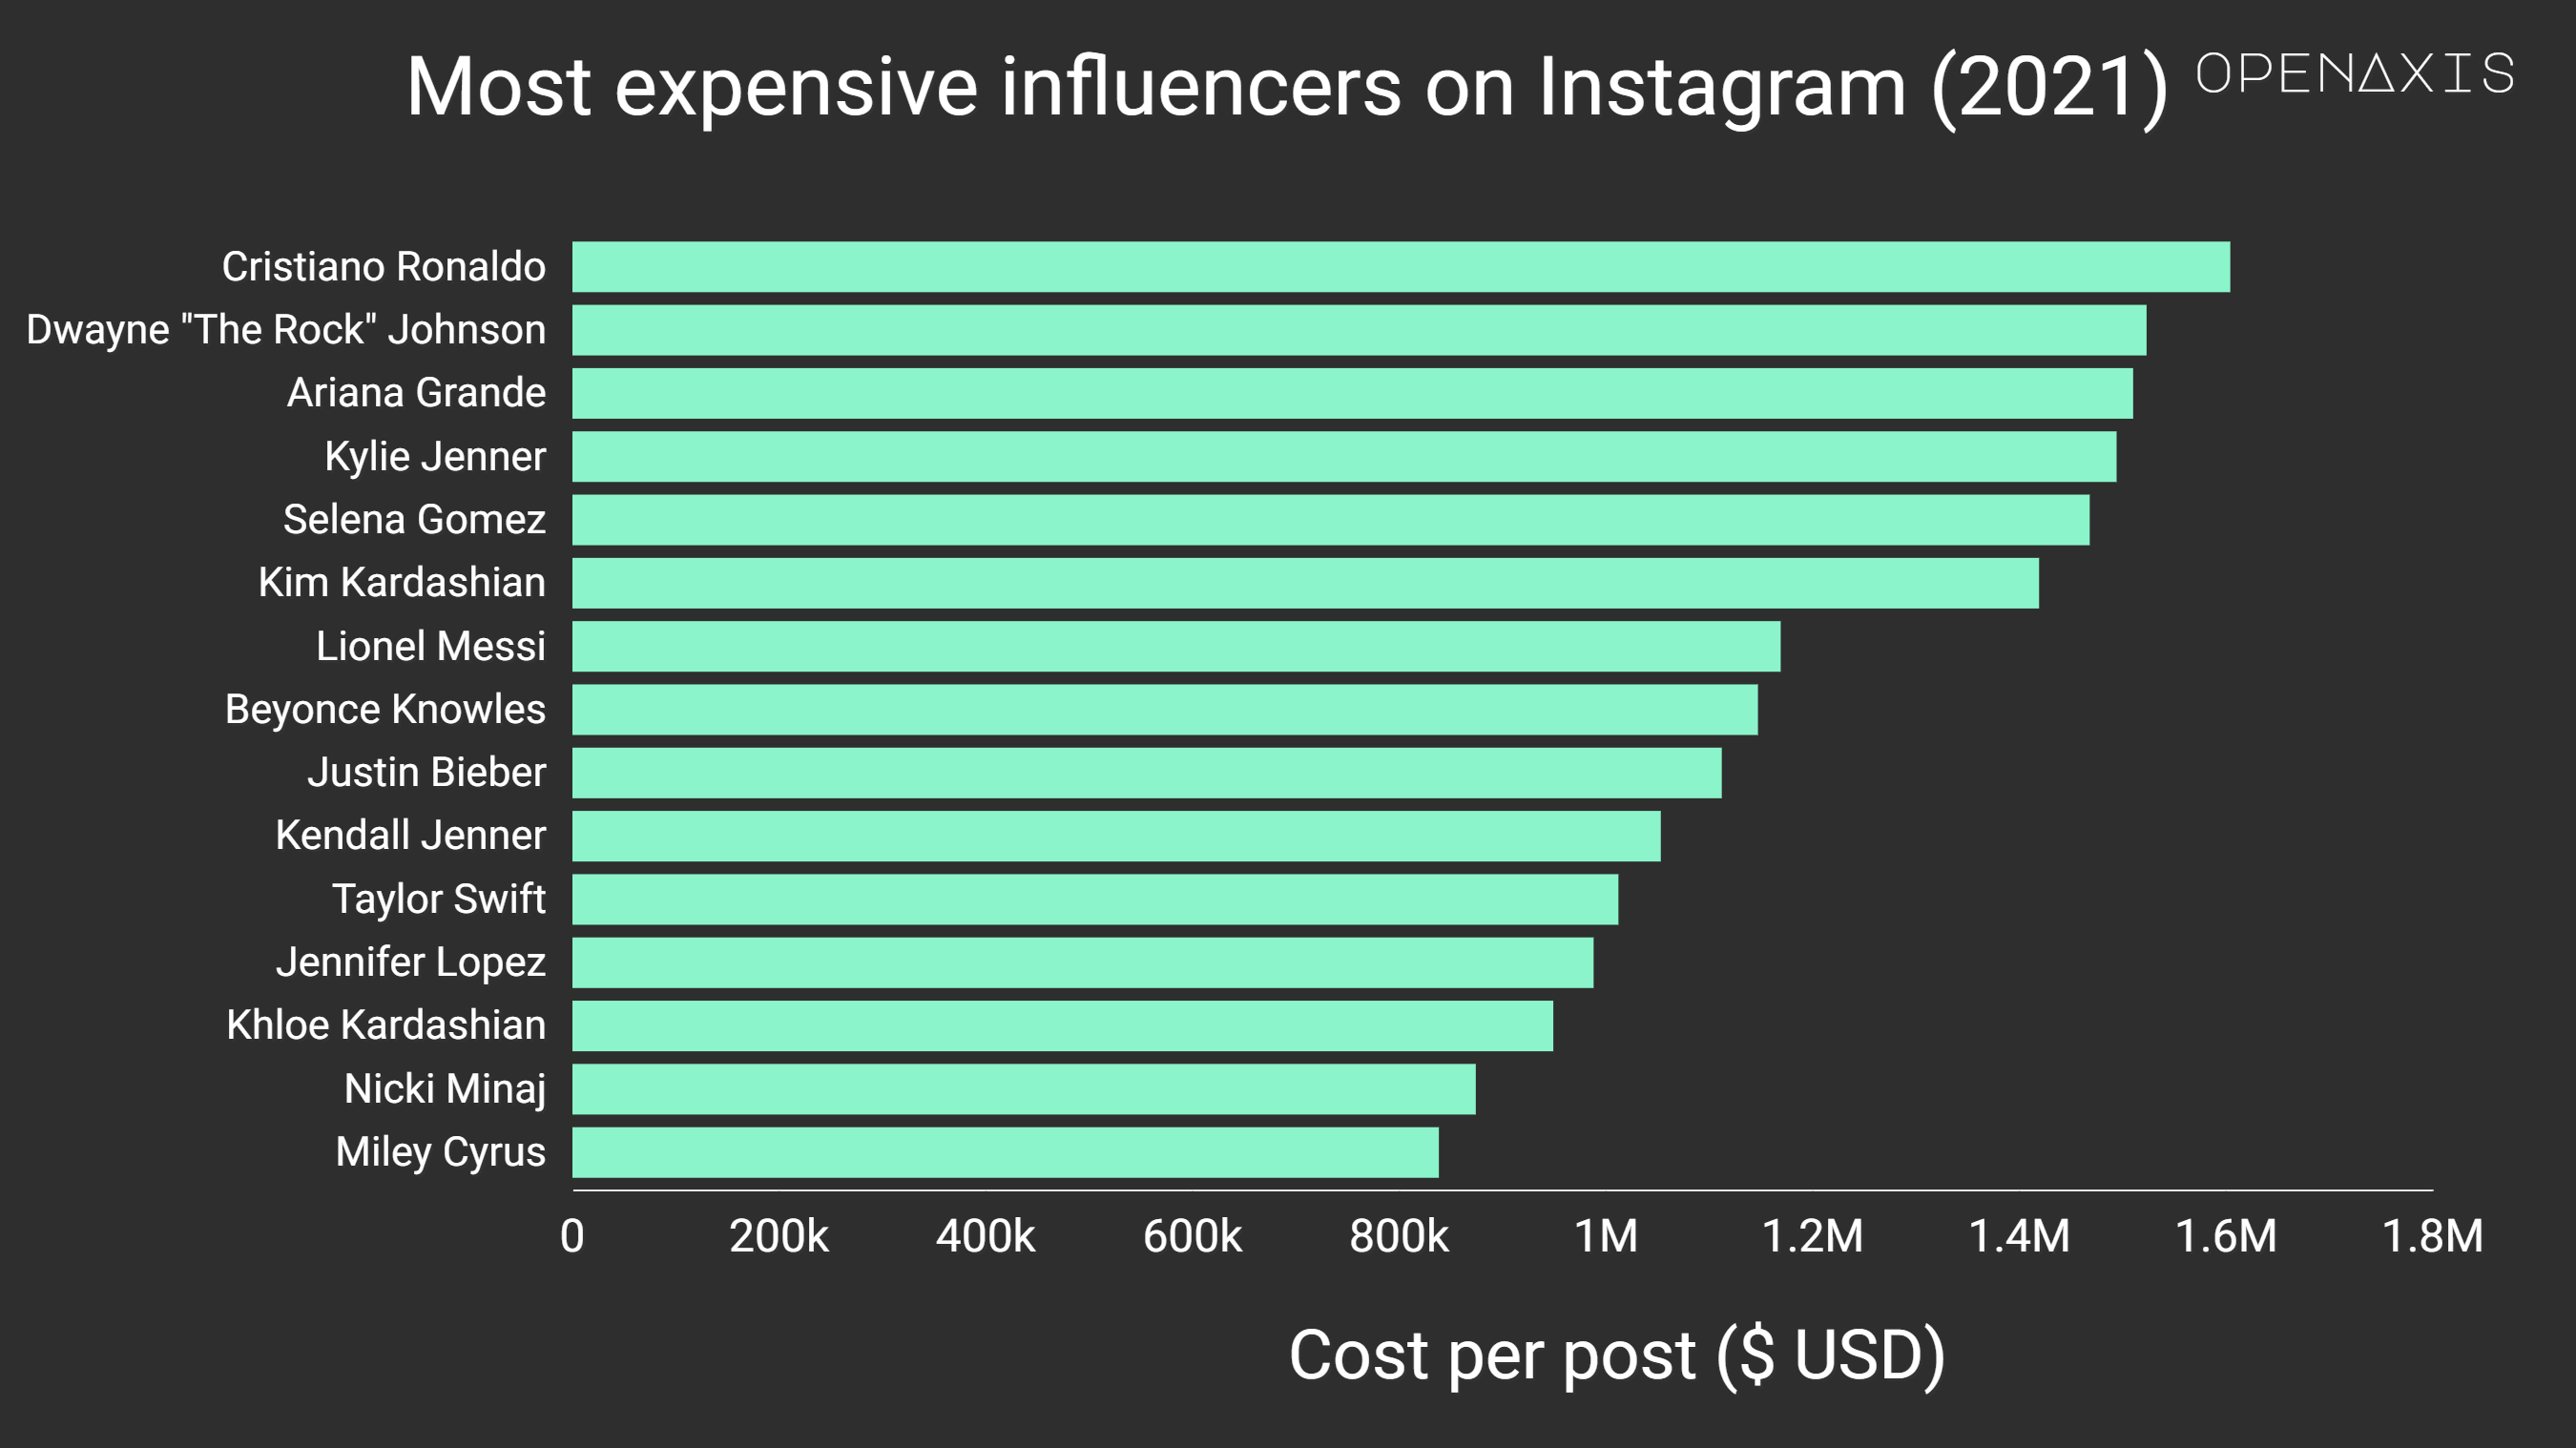 "Most expensive influencers on Instagram (2021)"